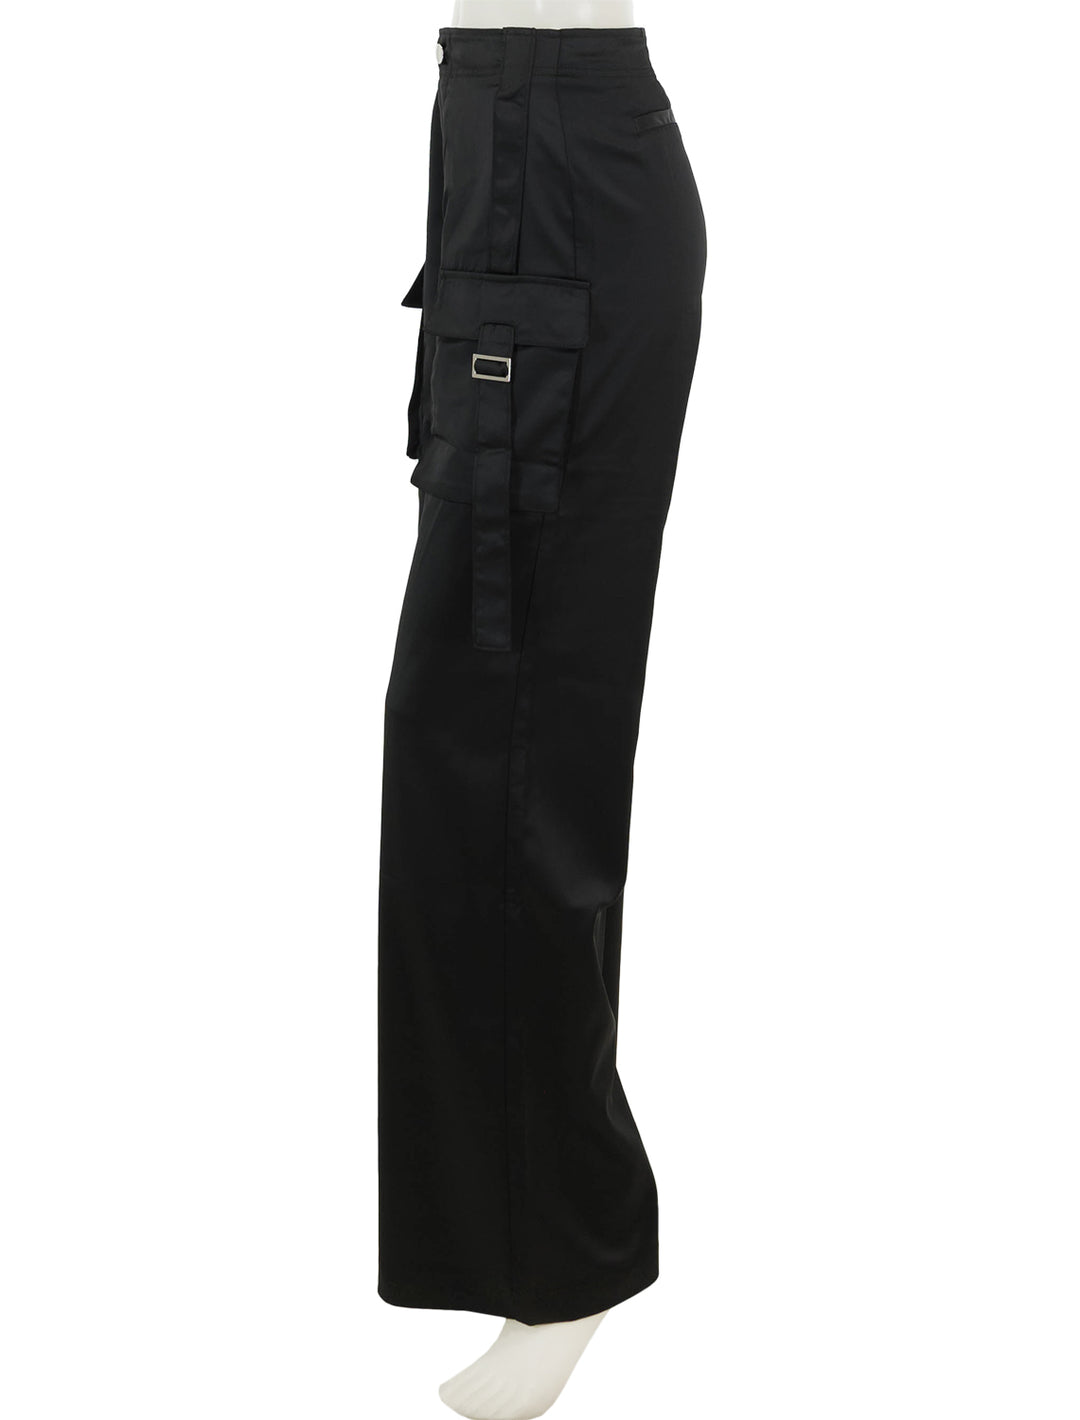 Side view of Steve Madden's ace pant in black.